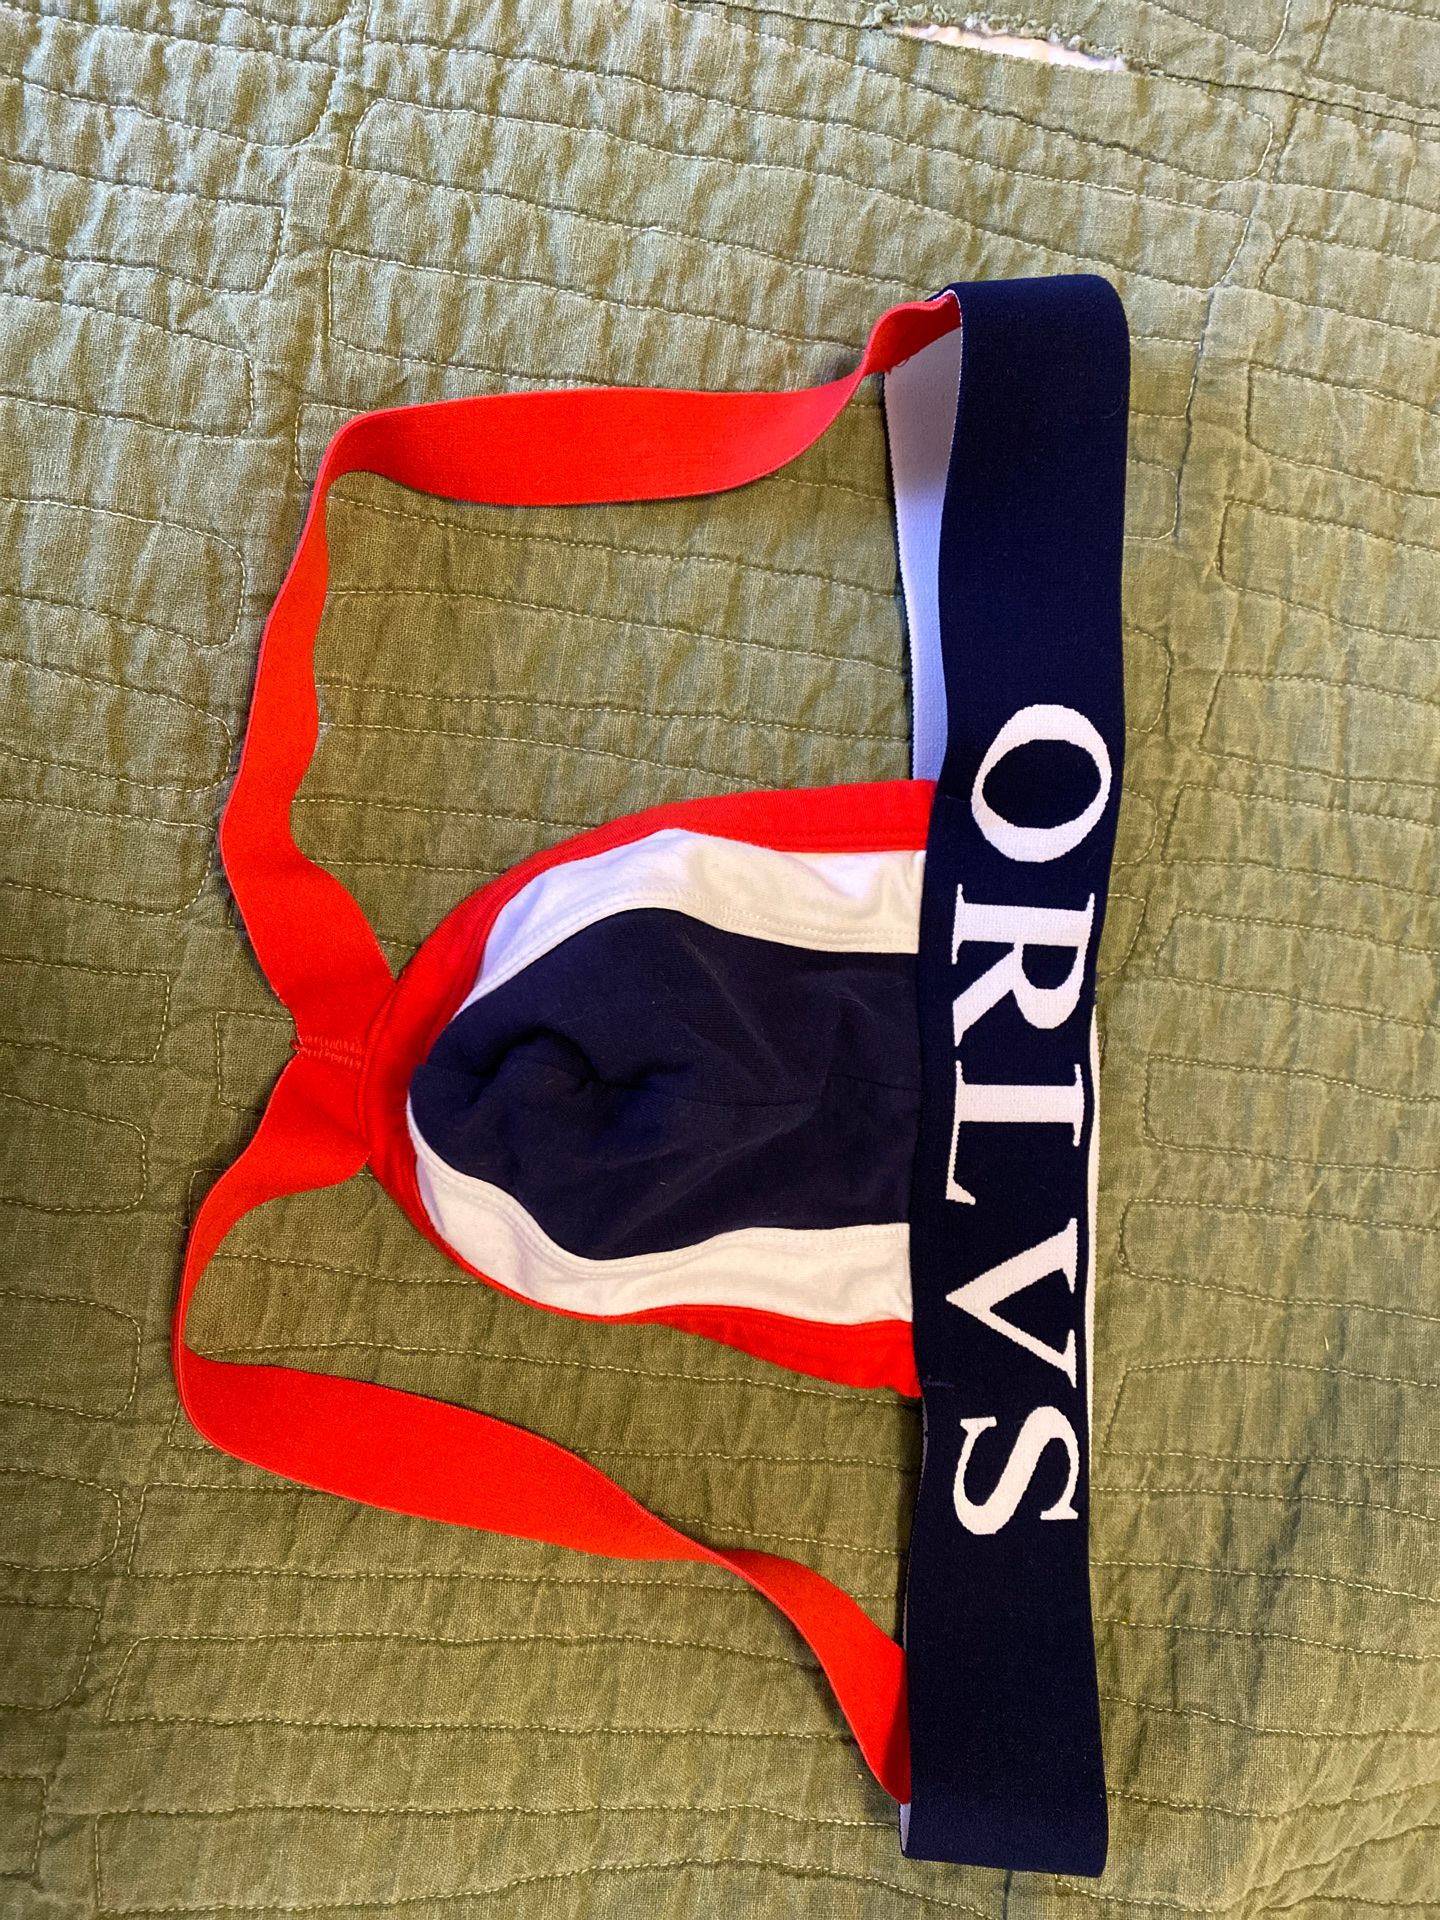 Orlvs red whit and blue jockstrap